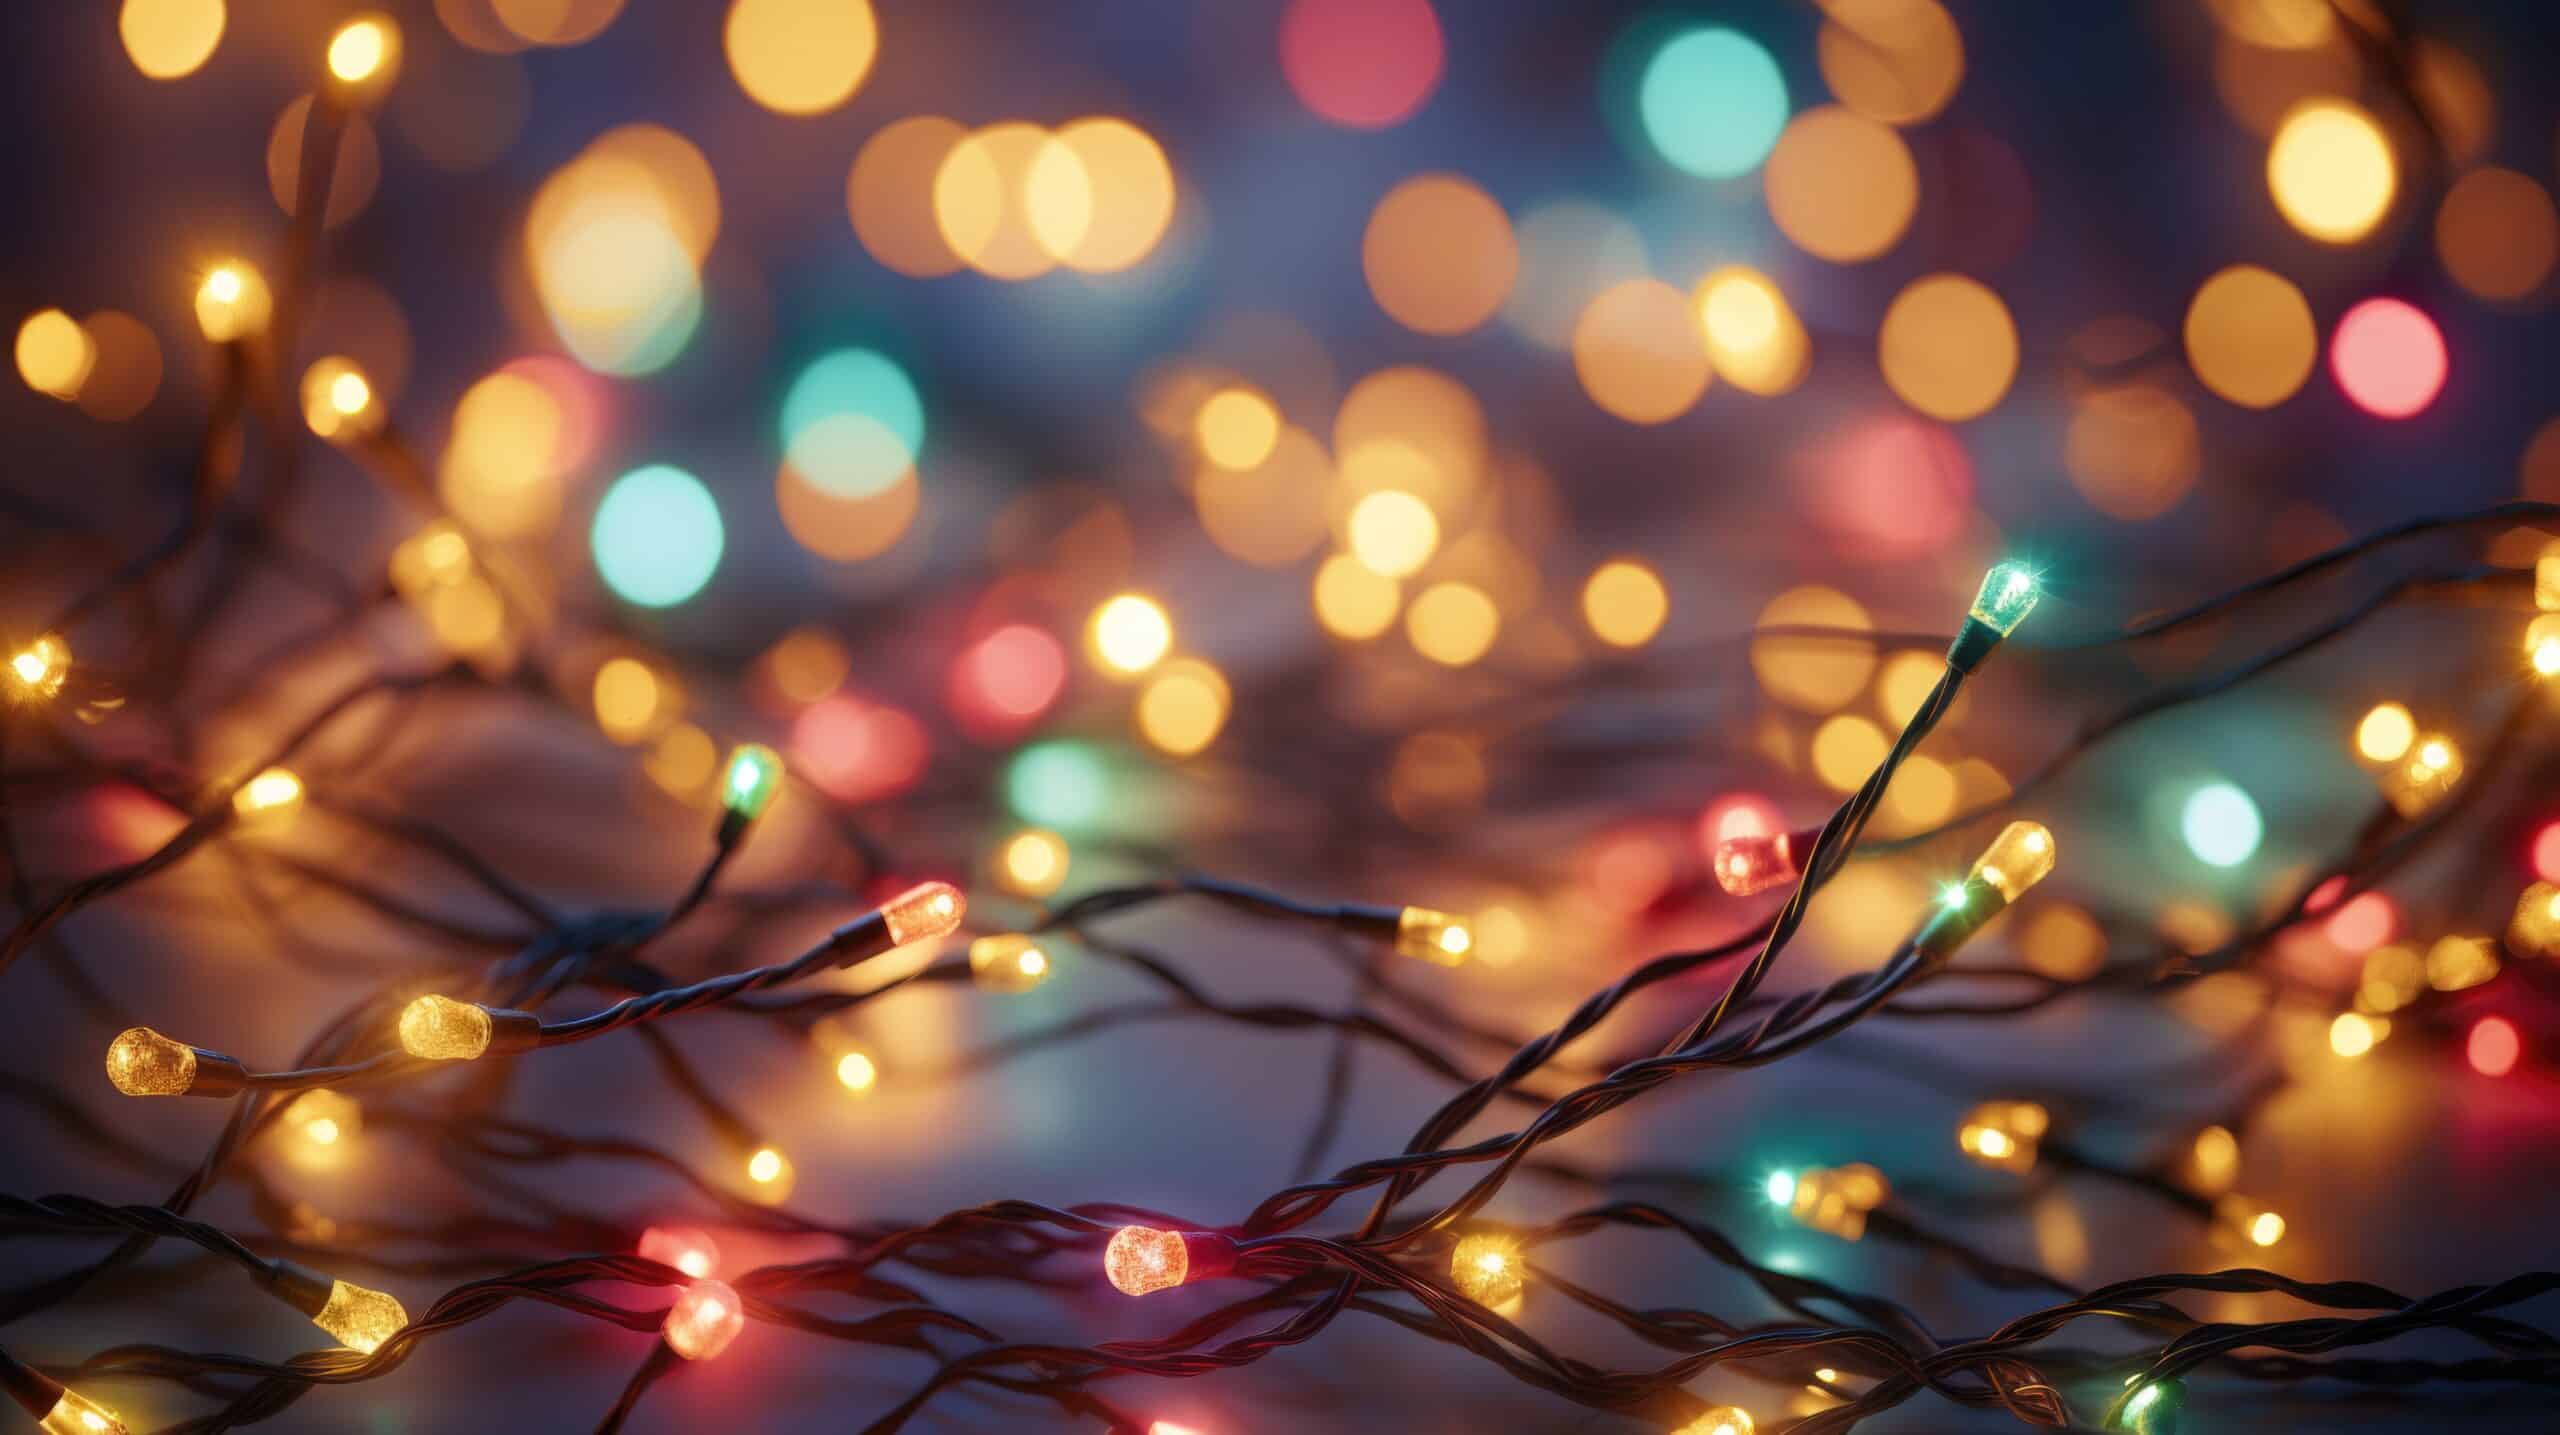 www.appr.com : How to attach Christmas lights to outdoor surfaces?